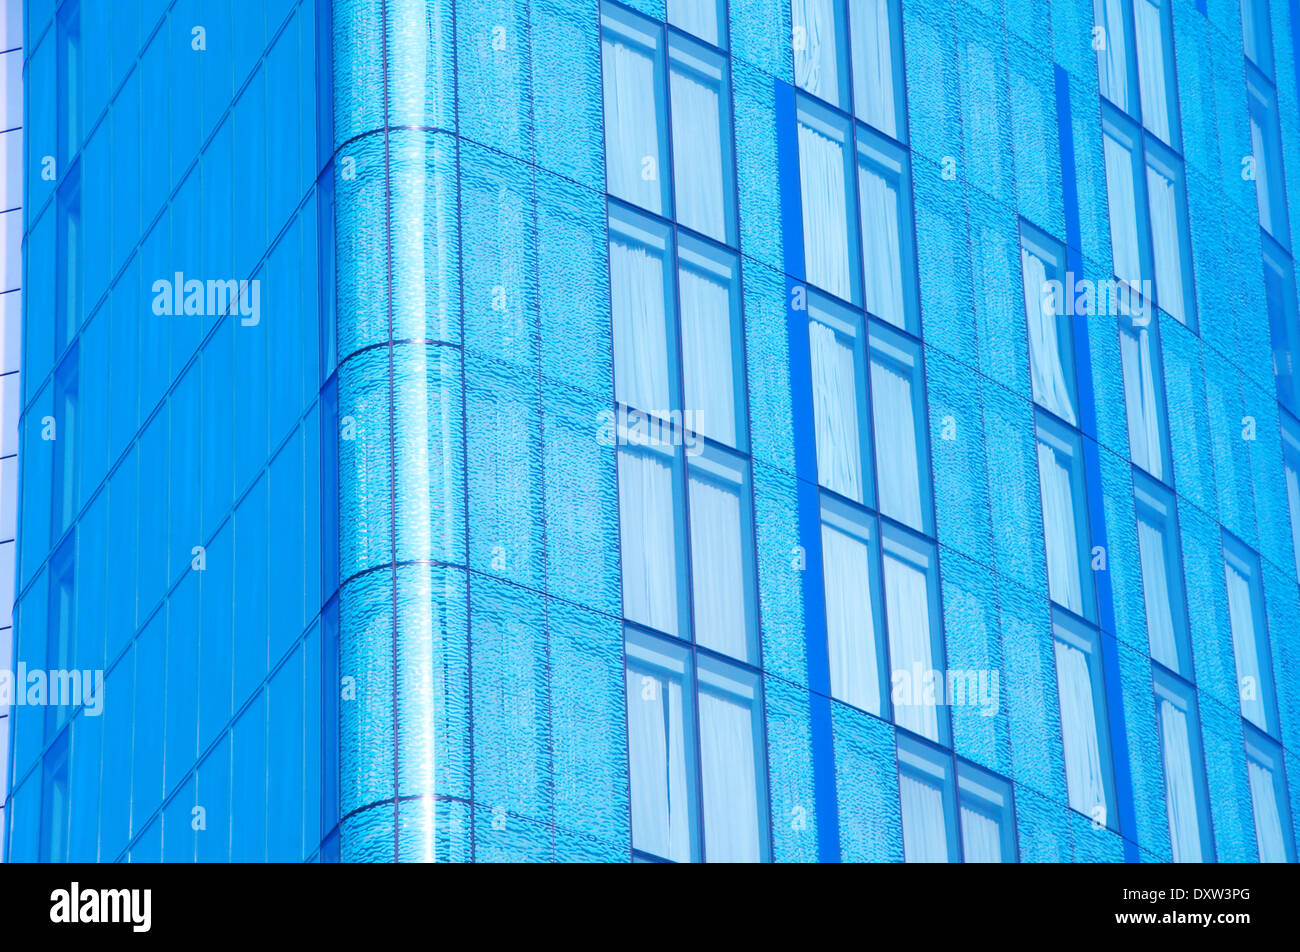 Abstract image of new city centre office building. Glass and steel building erected in city centre. 21st century architecture. Stock Photo